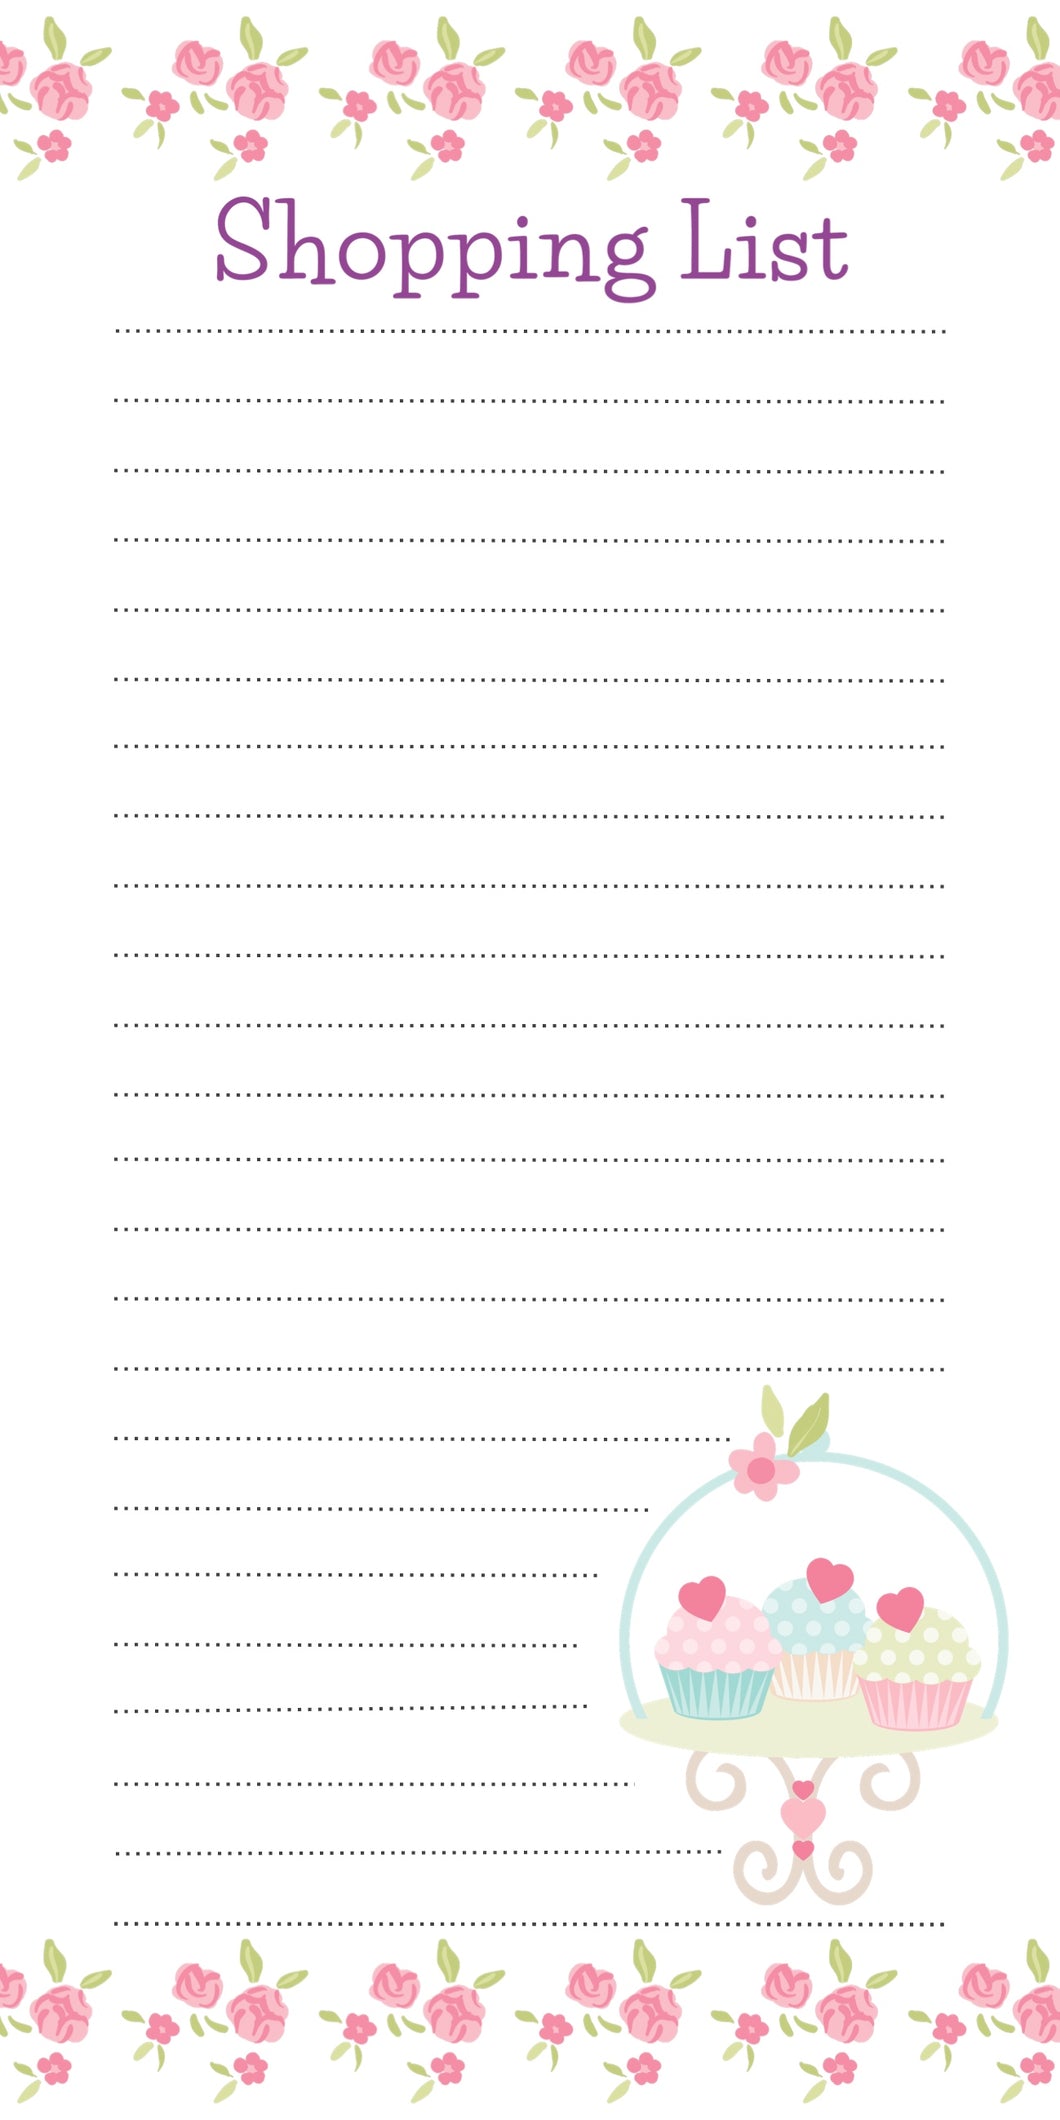 Shopping list pad with cupcake stand illustration